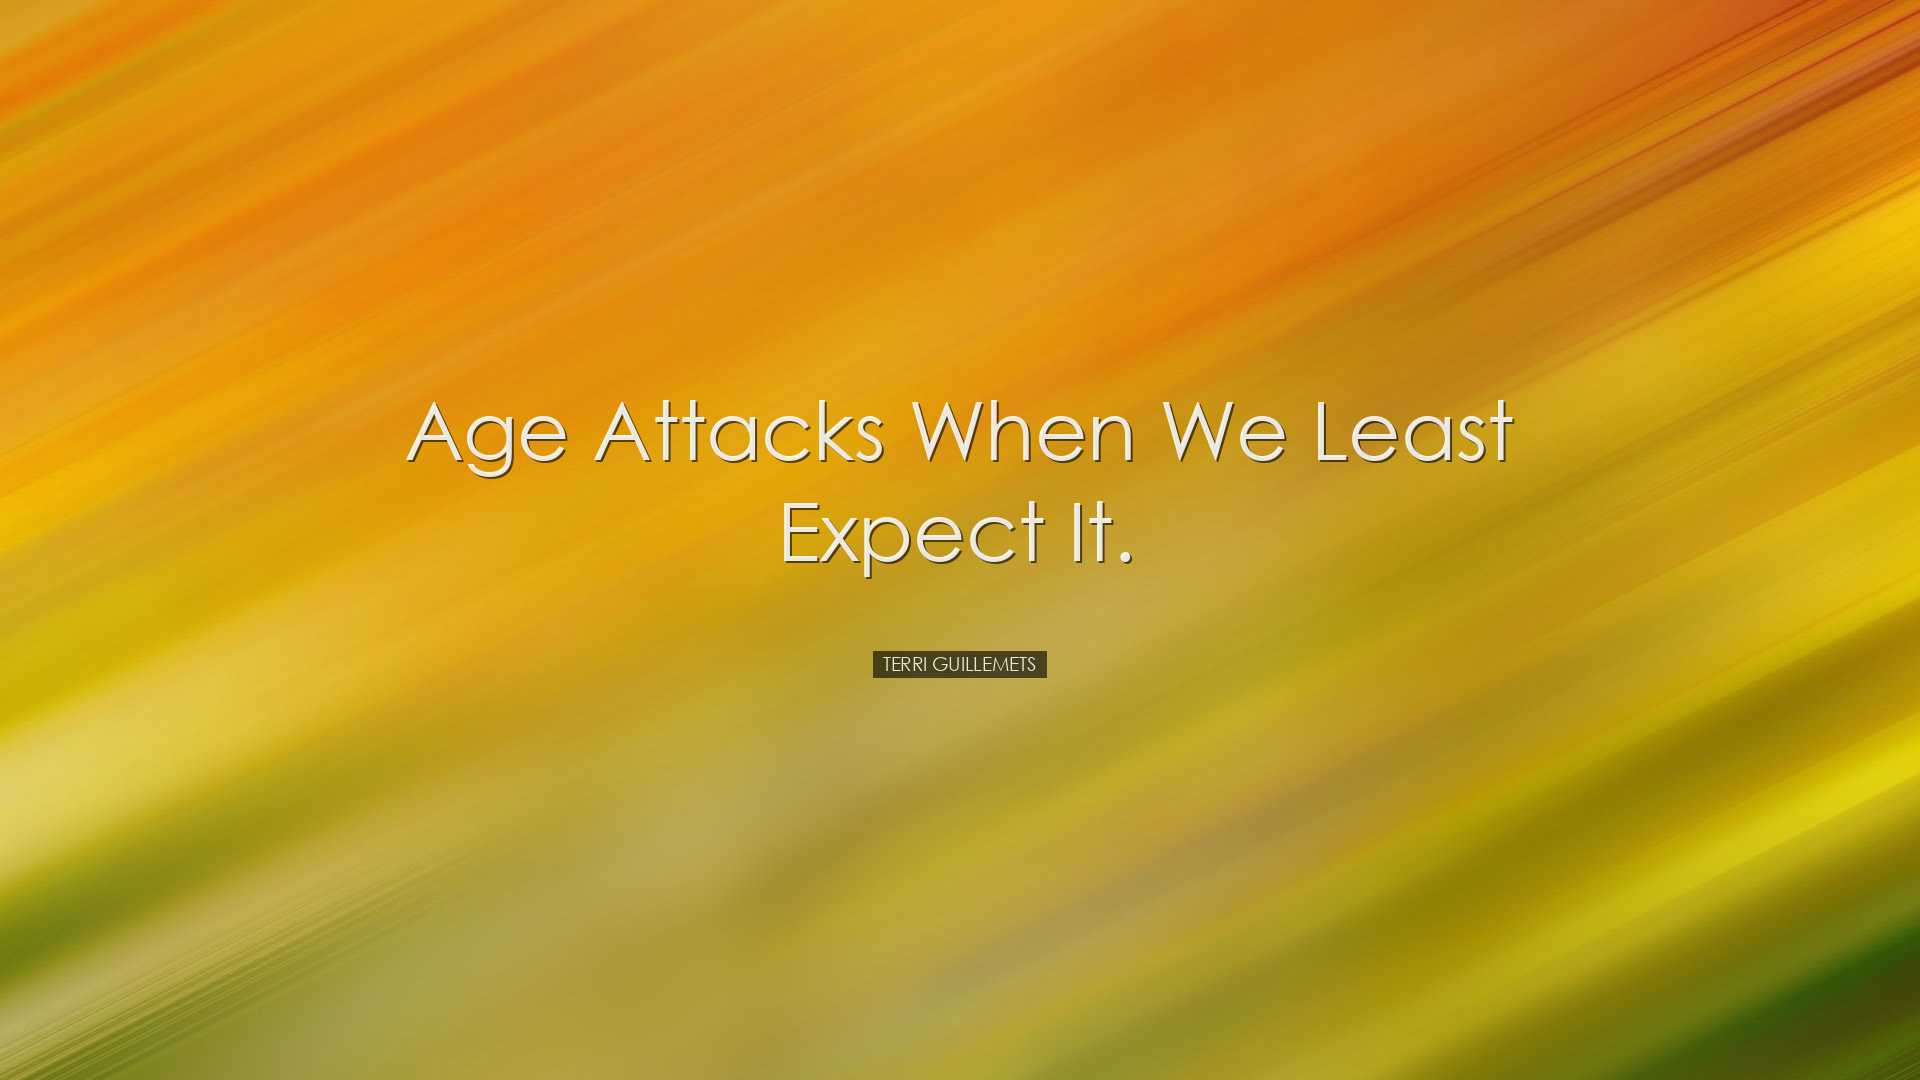 Age attacks when we least expect it. - Terri Guillemets